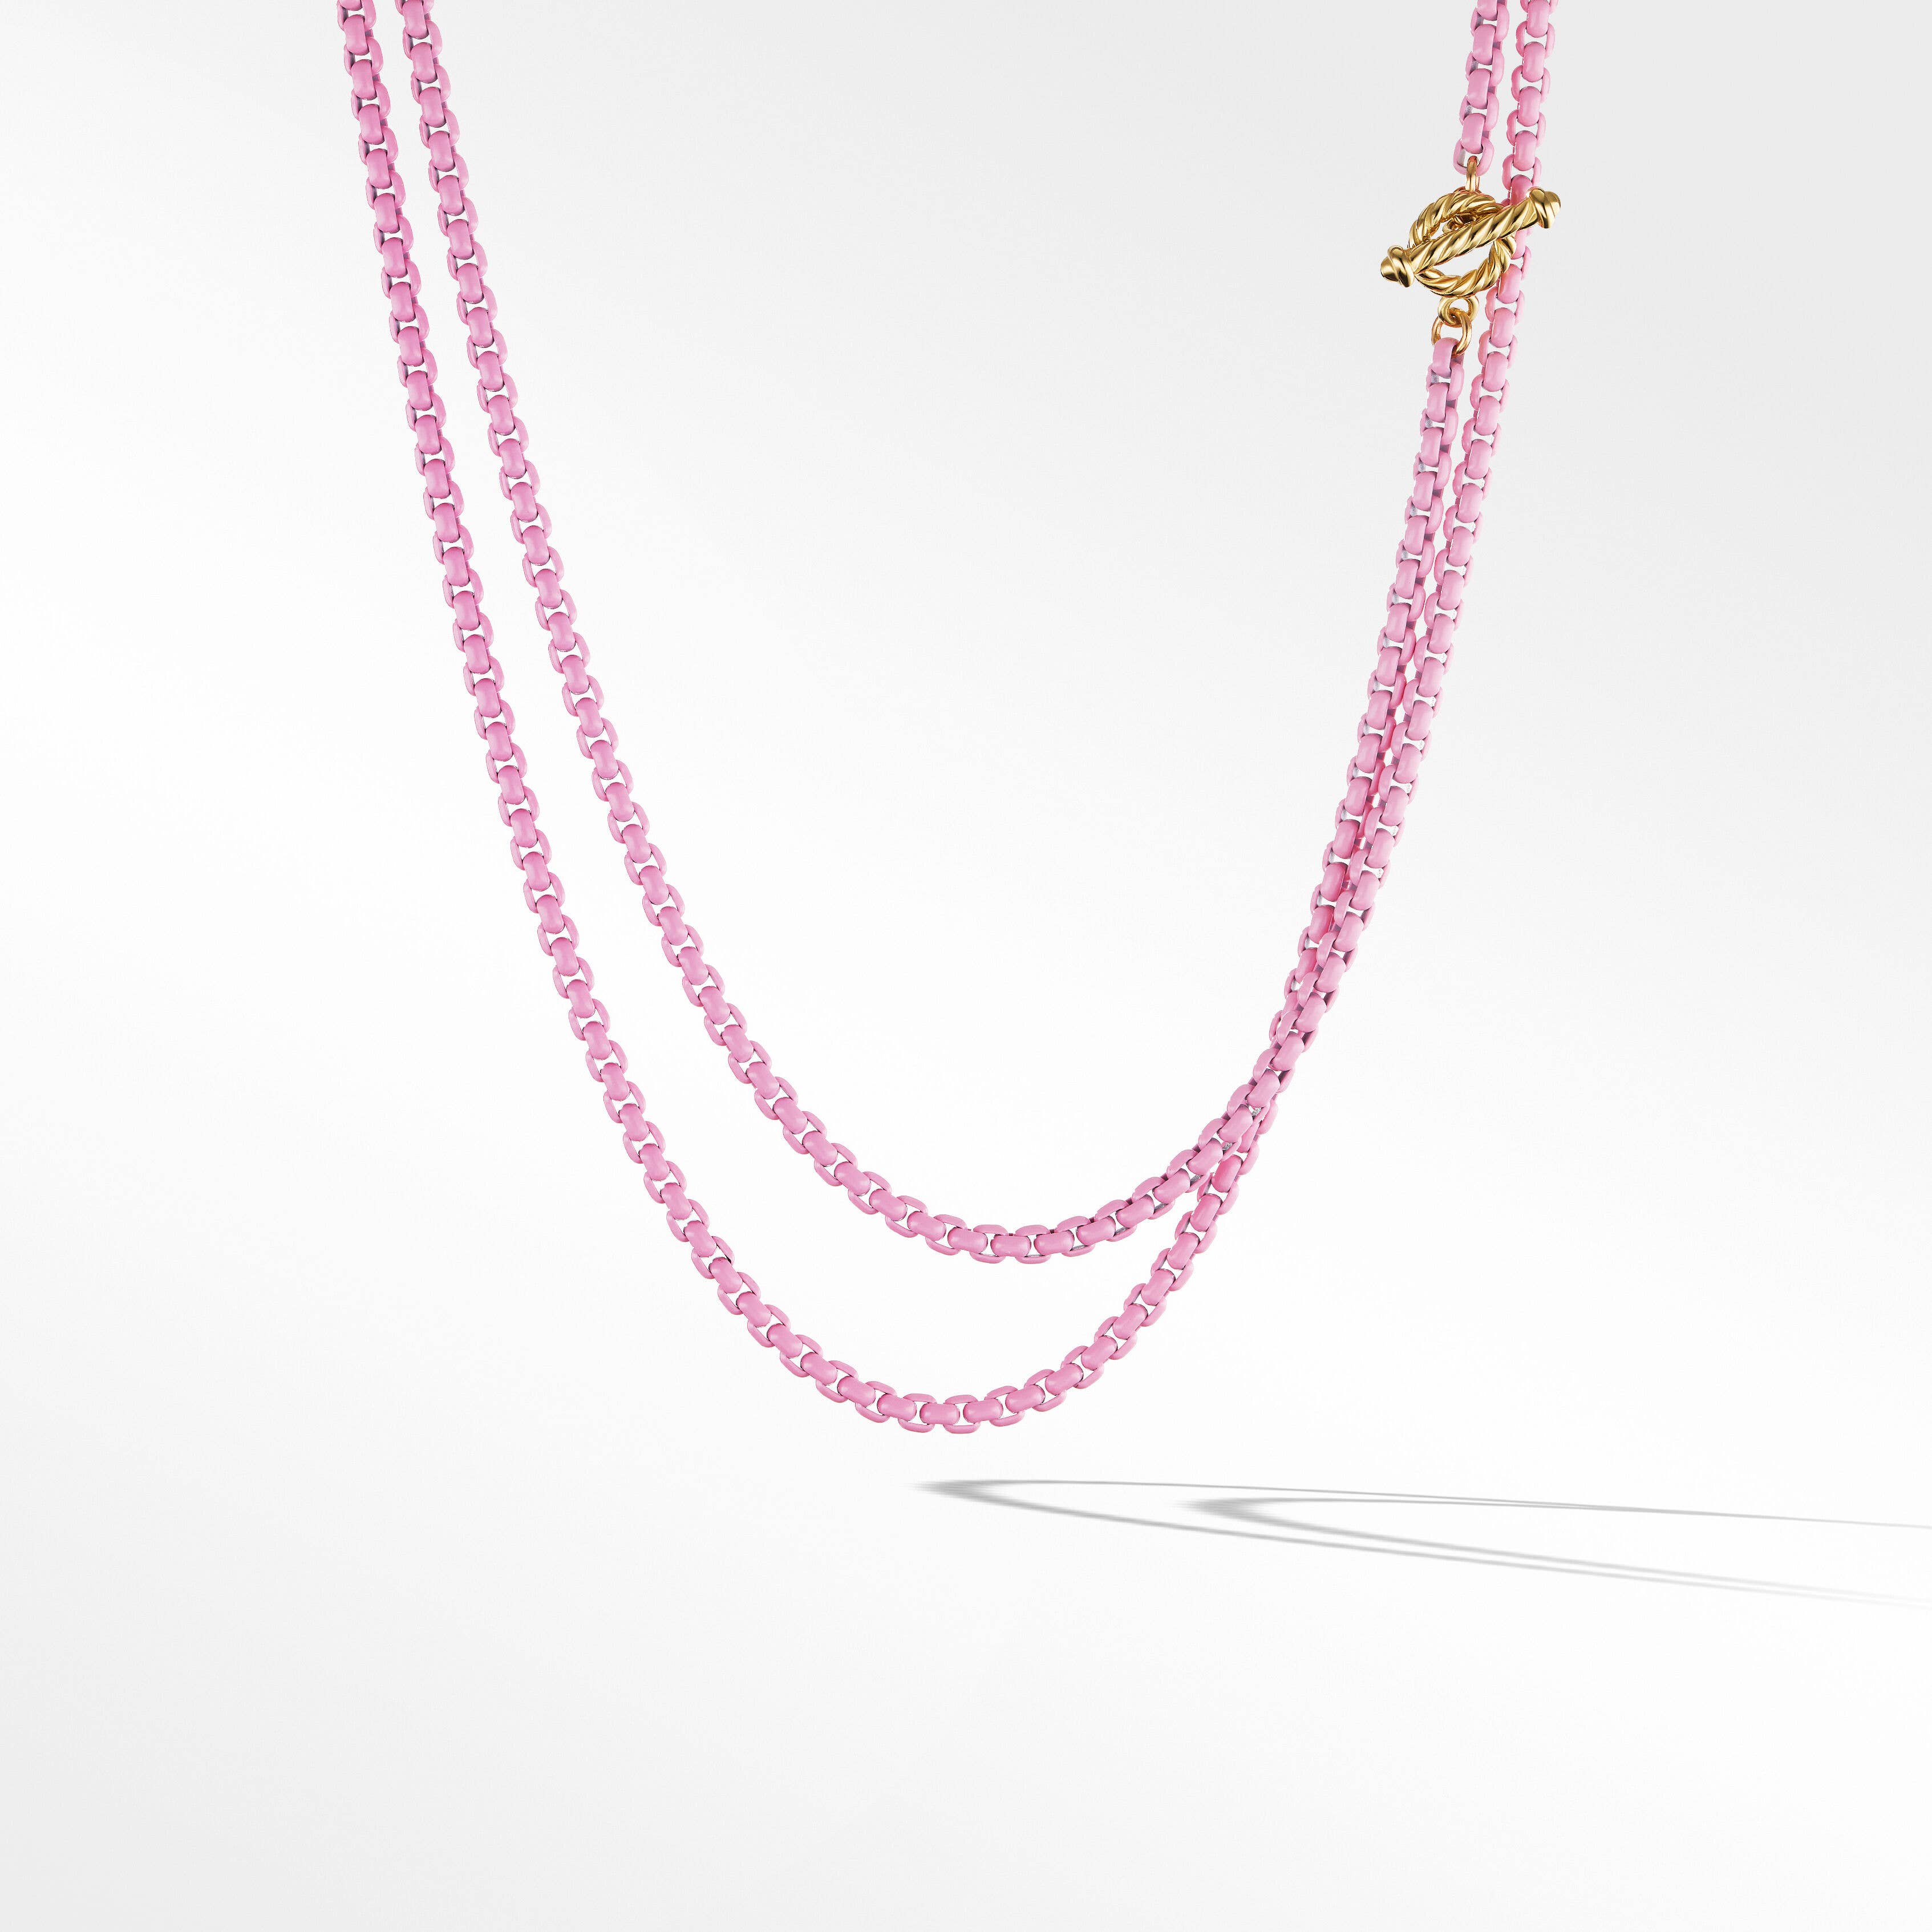 DY Bel Aire Chain Necklace in Blush with 14K Yellow Gold Accents